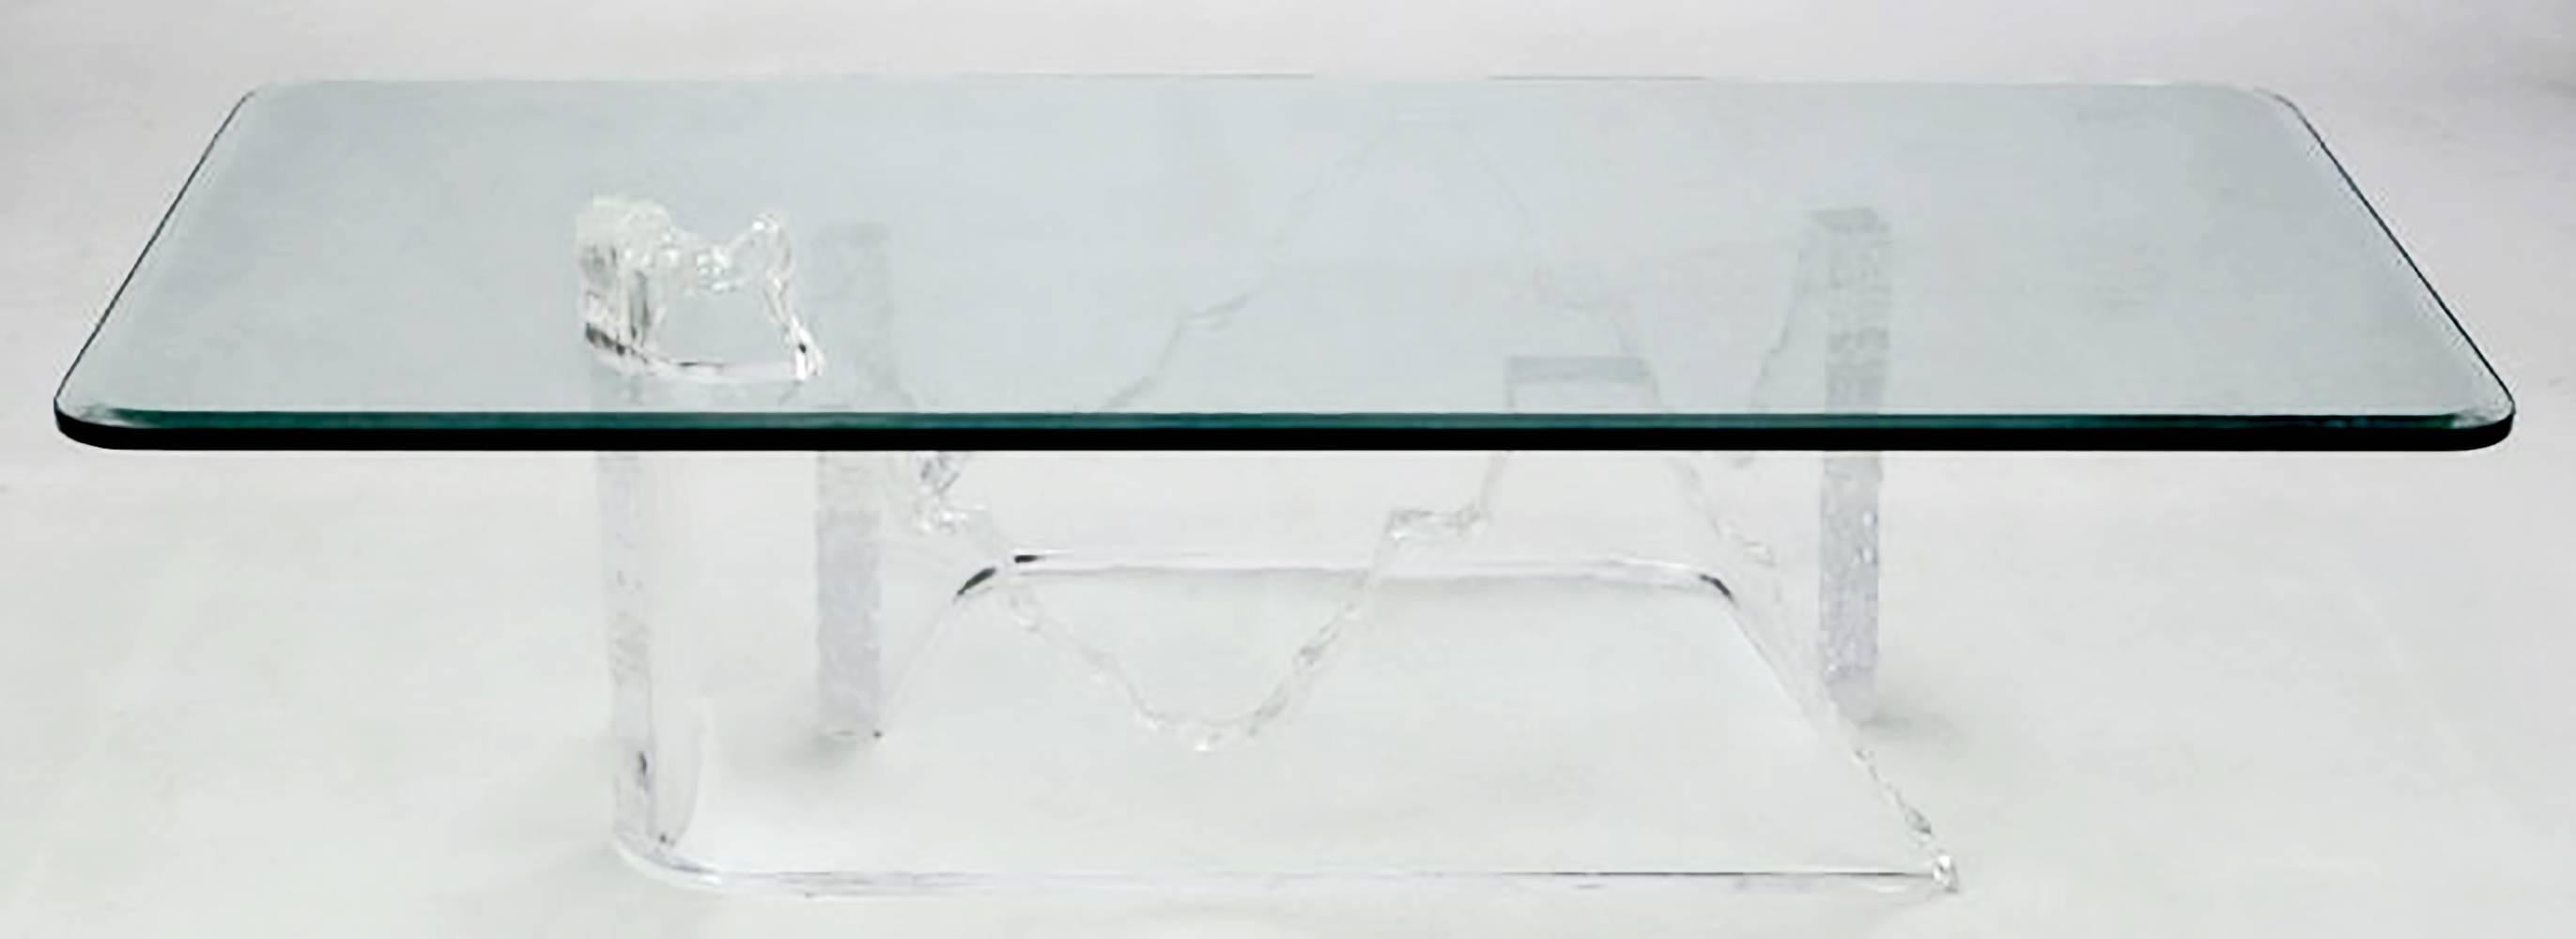 Unusual Lucite and glass top coffee table in form of an iceberg or melting glacier. Attributed to lion in frost, the base is comprised of two carved and bent thick Lucite pieces, with one section appearing to pierce the top. It is actually a third